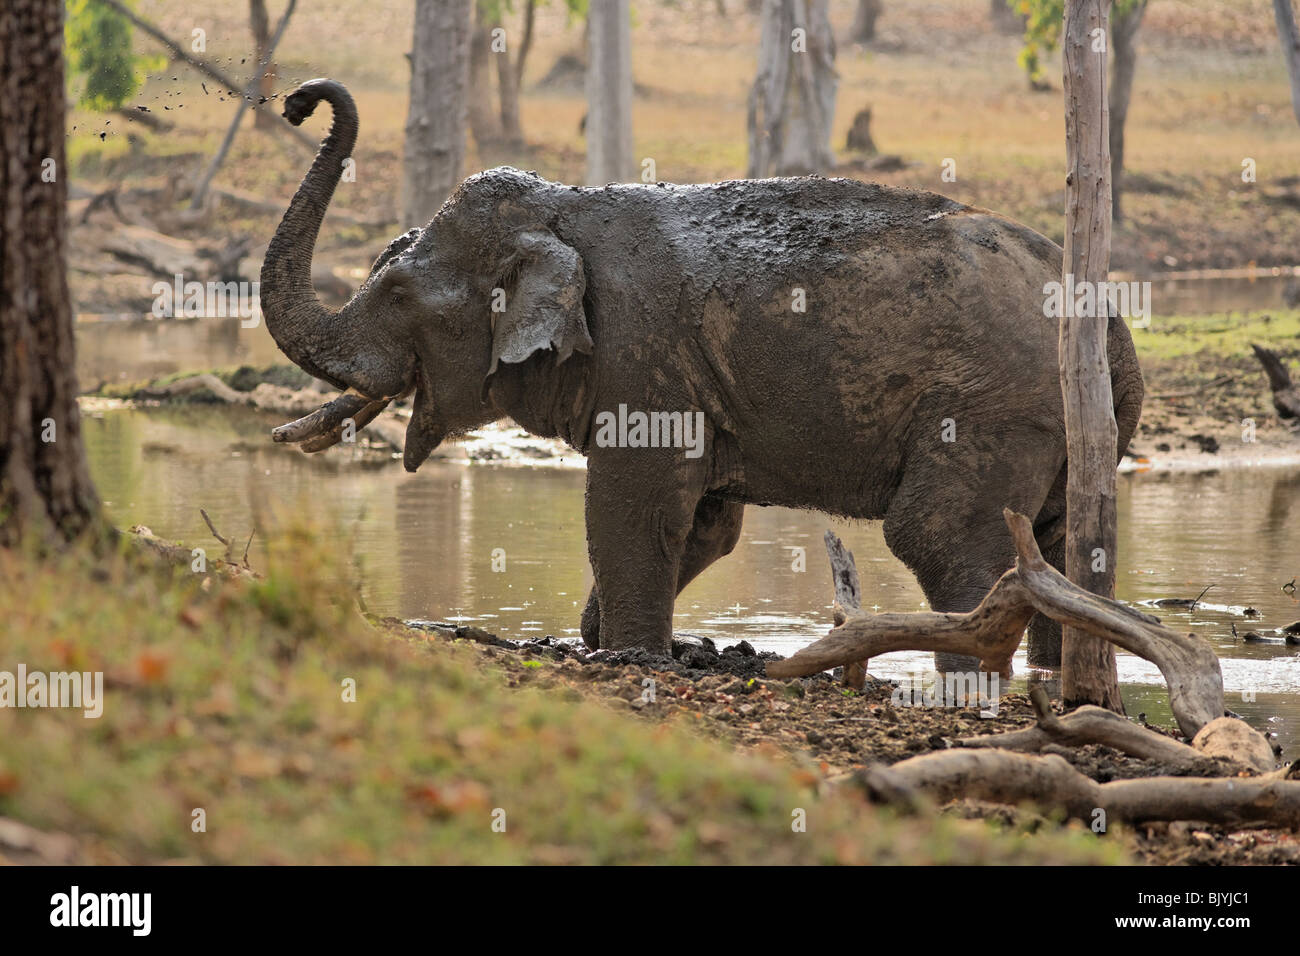 Elephant having muddy bath in the wild forest of Pench, India. Stock Photo